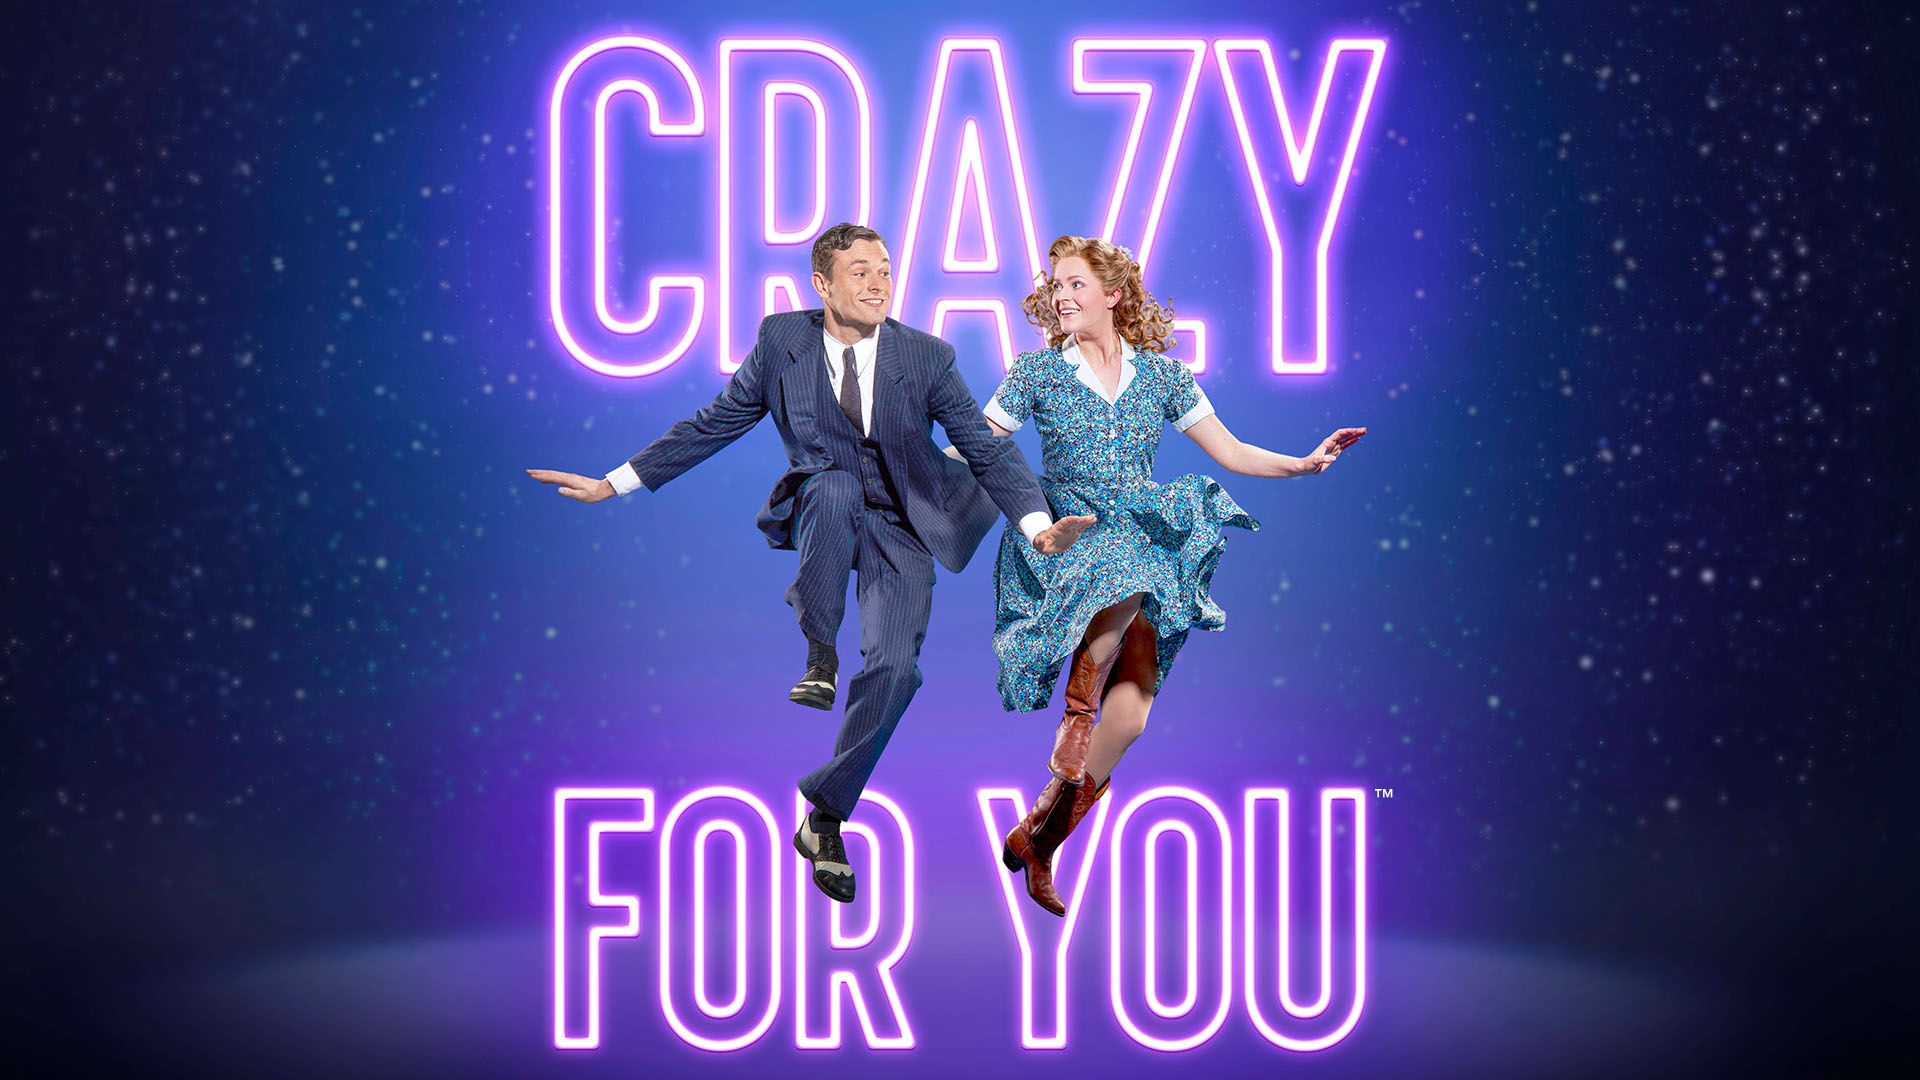 Crazy For You musical West End cast with Charlie Stemp and Carly